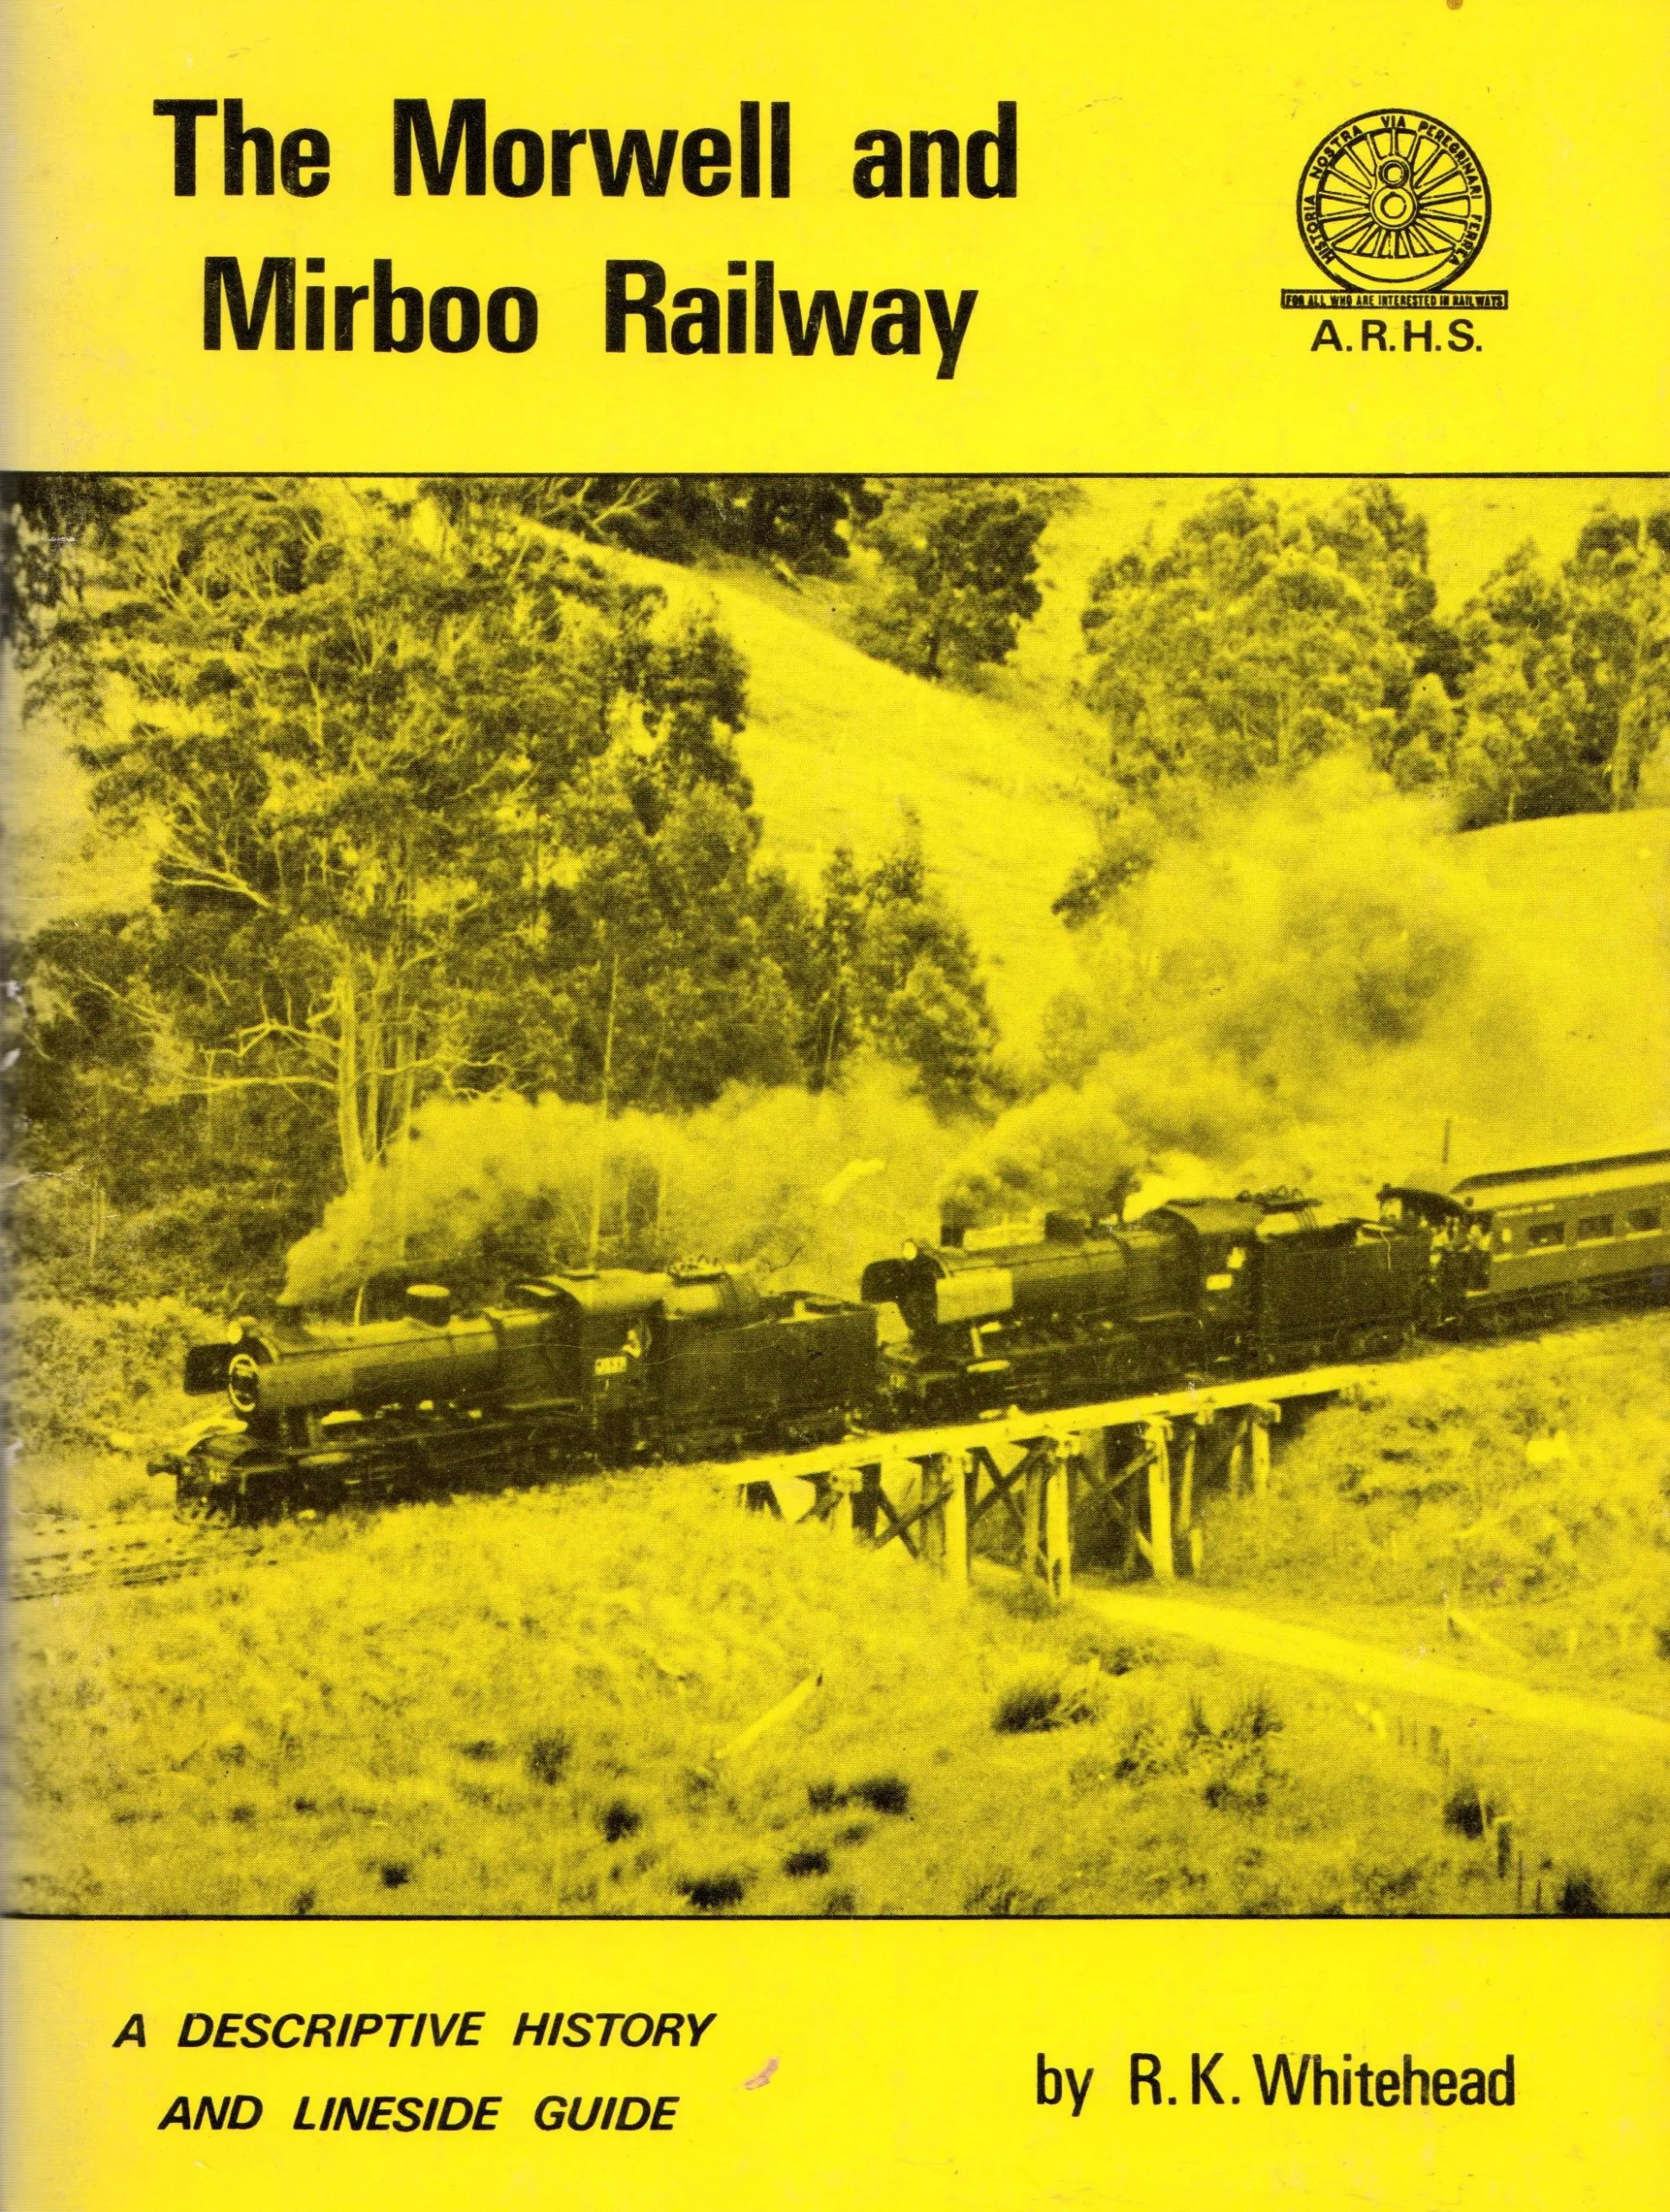 The Morwell and Mirboo Railway – A Descriptive History and Lineside Guide